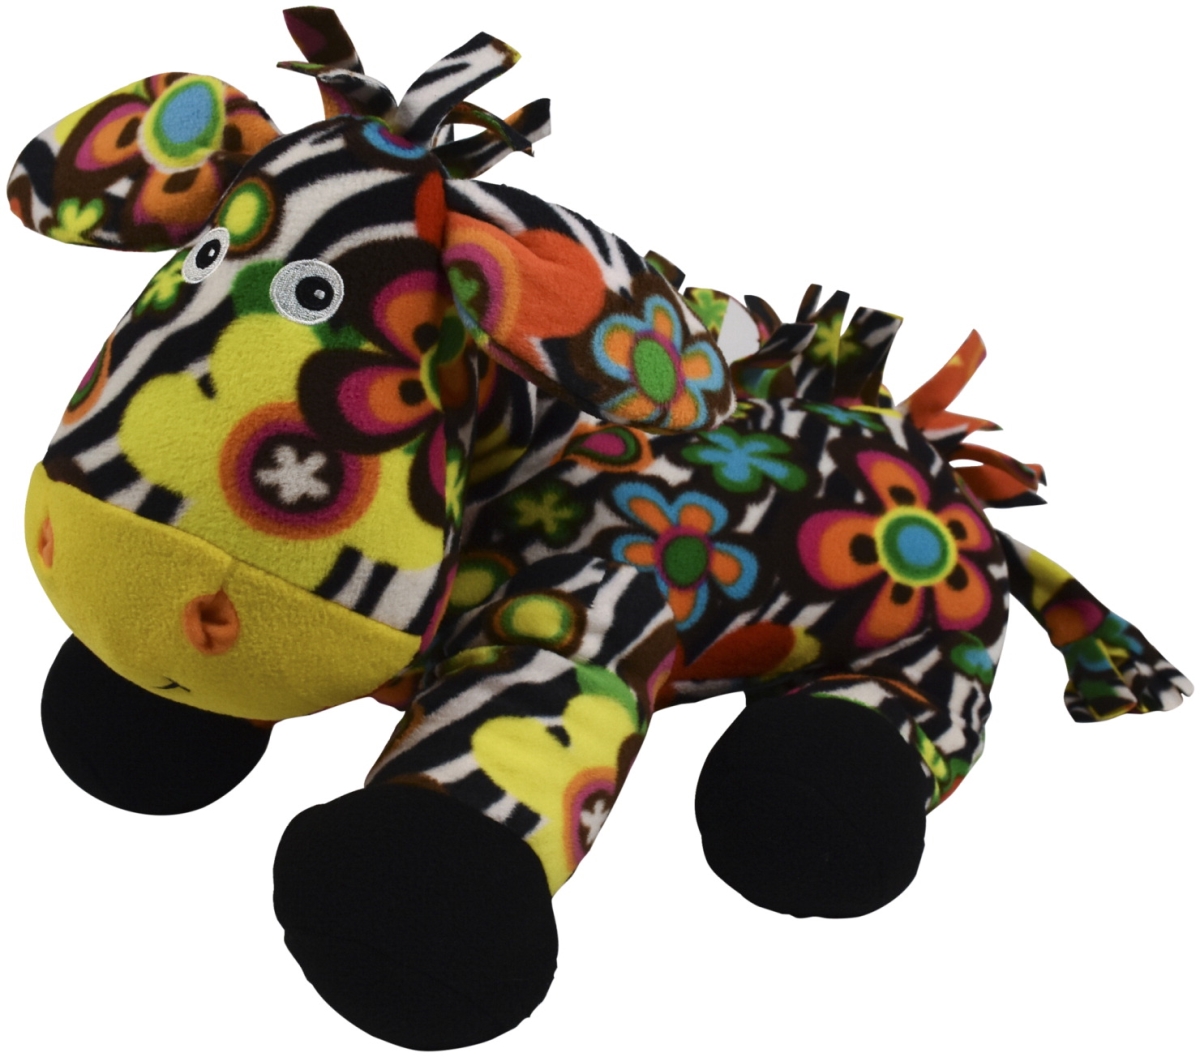 2005626 5 Lbs Zooey The Zebra Weighted Animal, Multi Color